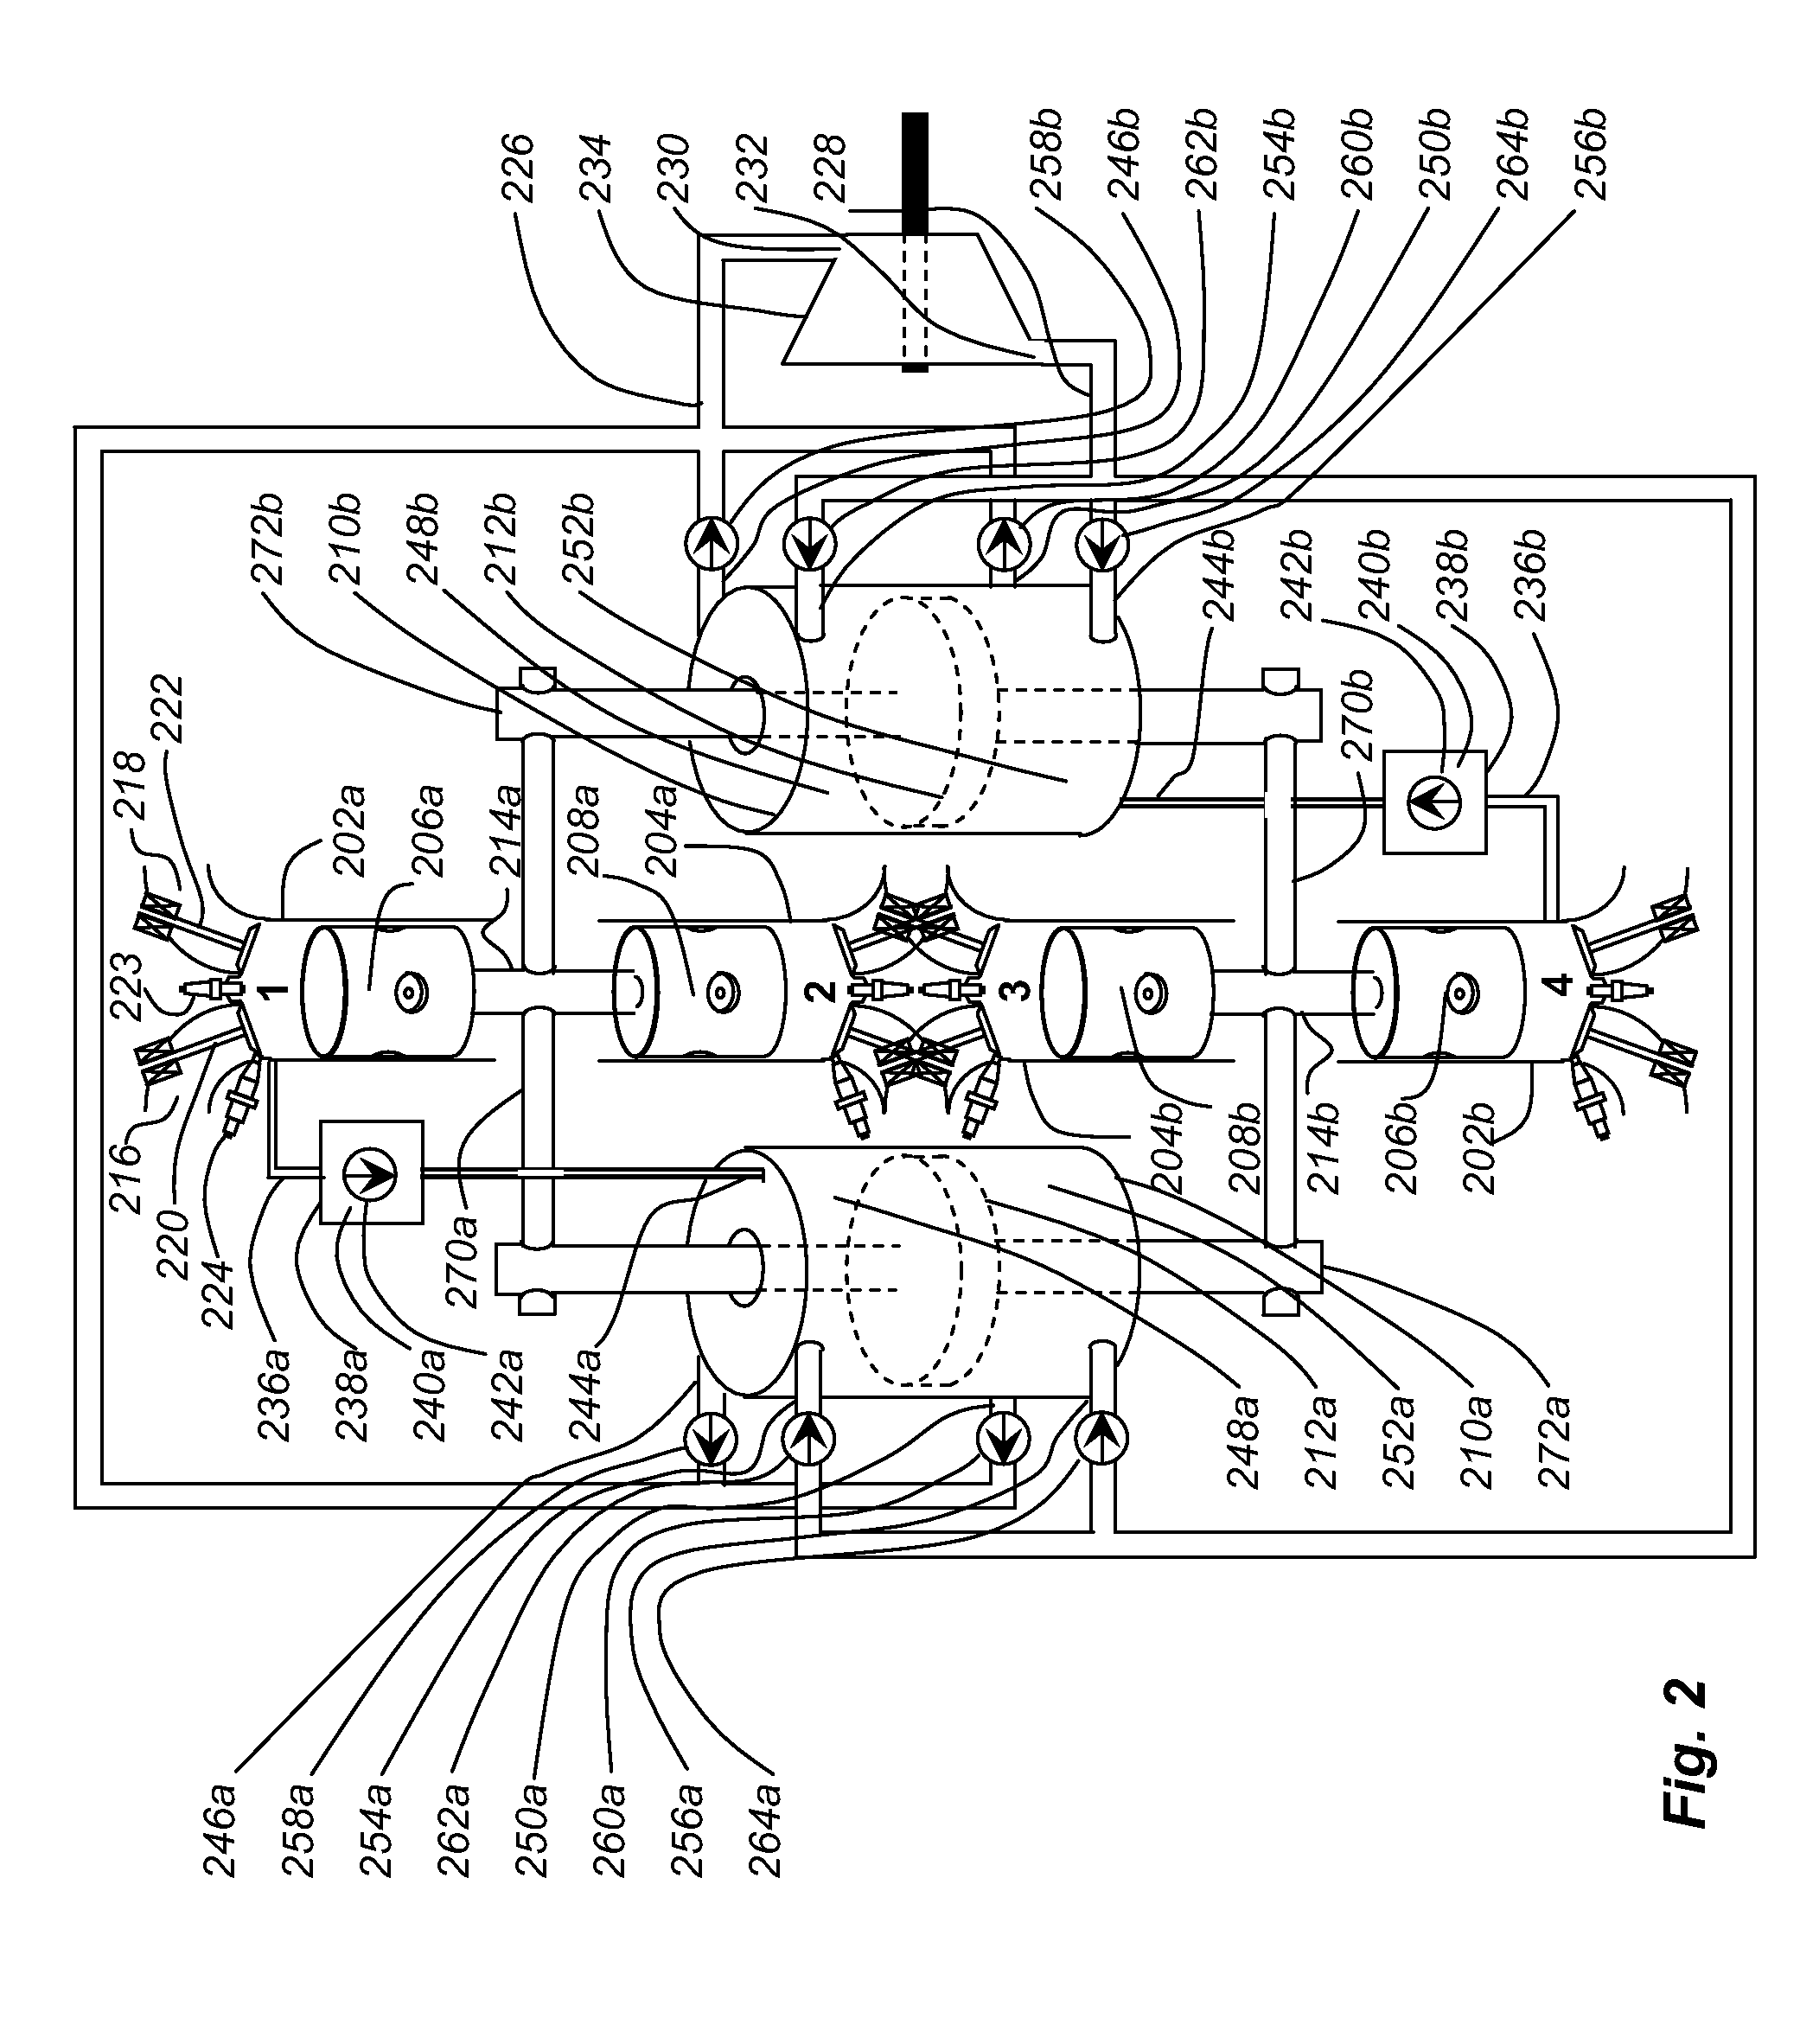 Internal combustion engine driven turbo-generator for hybrid vehicles and power generation